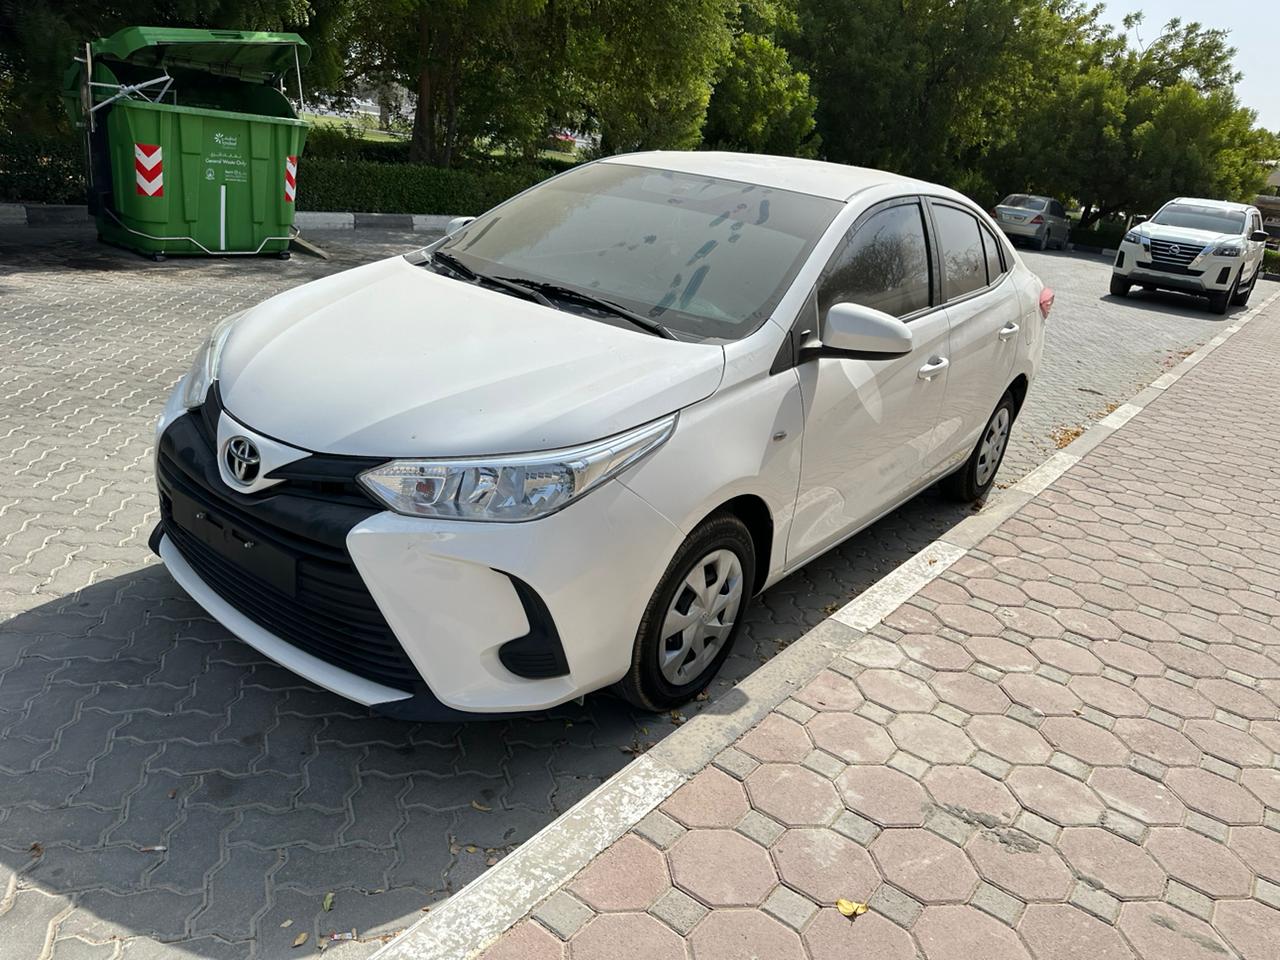 Toyota MODEL YEAR:2021 for sale-pic_3